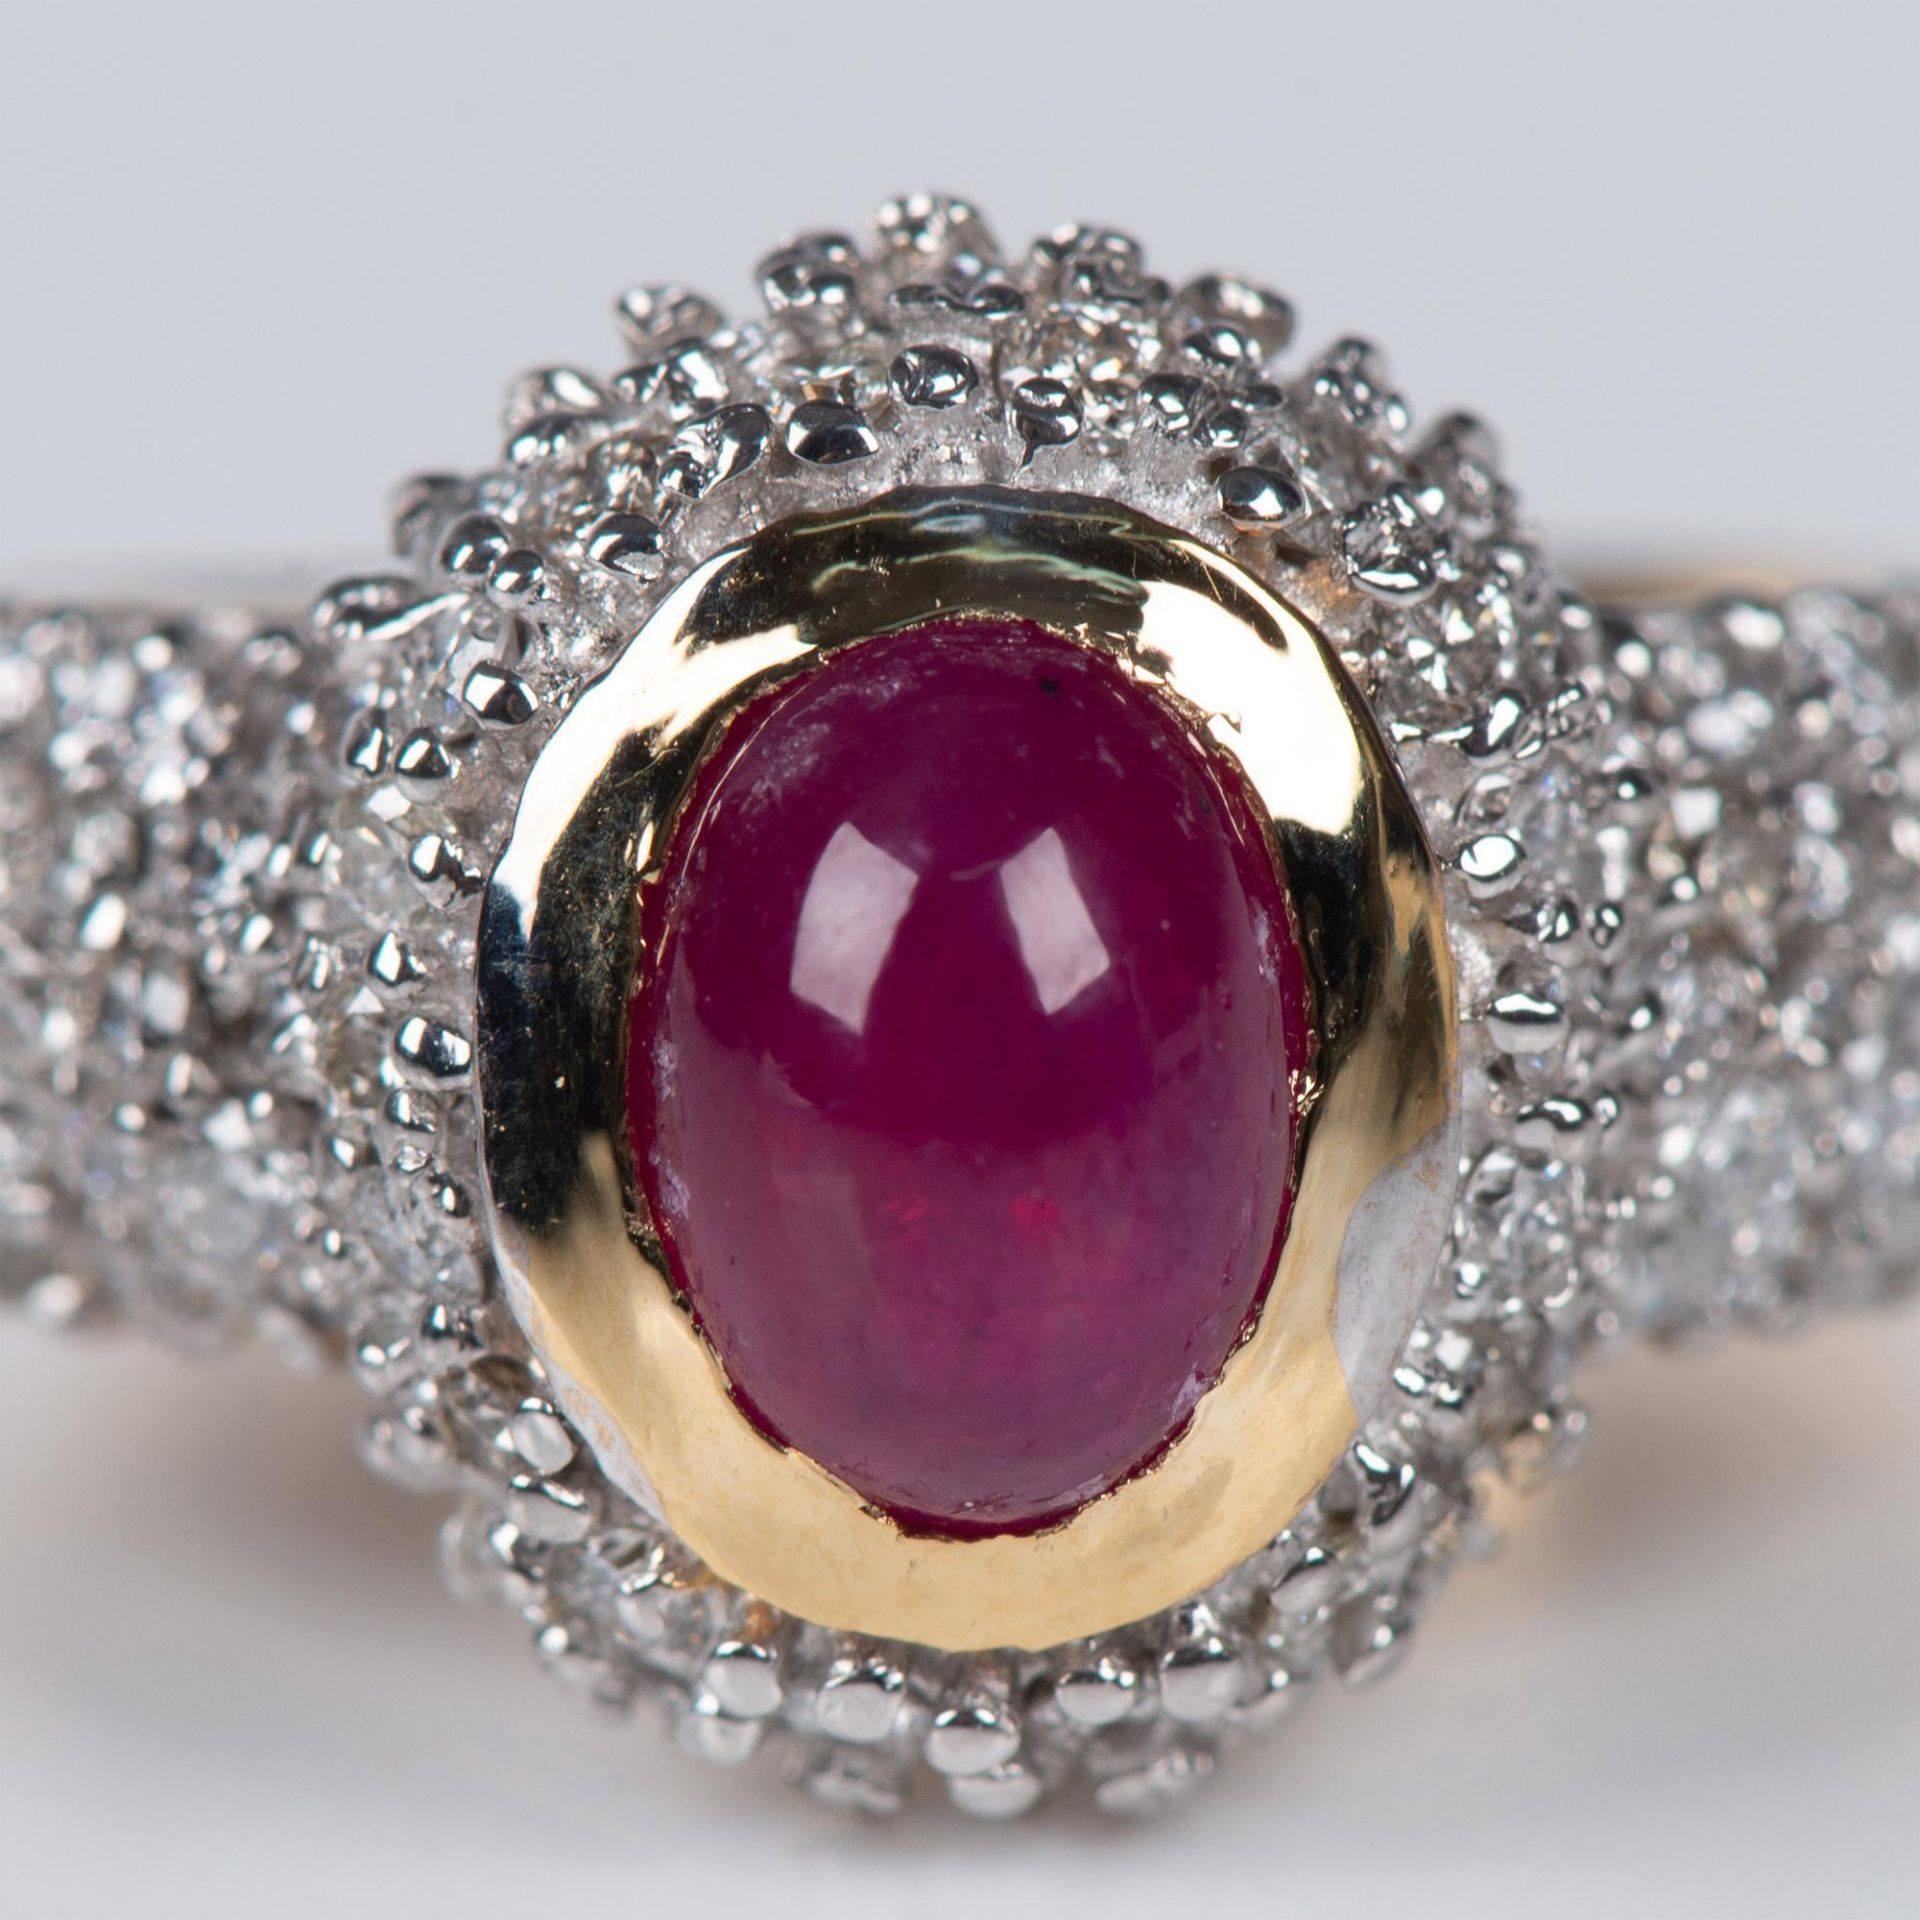 Fabulous 14K Yellow Gold, Diamond, and Ruby 2.9ctw Ring - Image 10 of 11